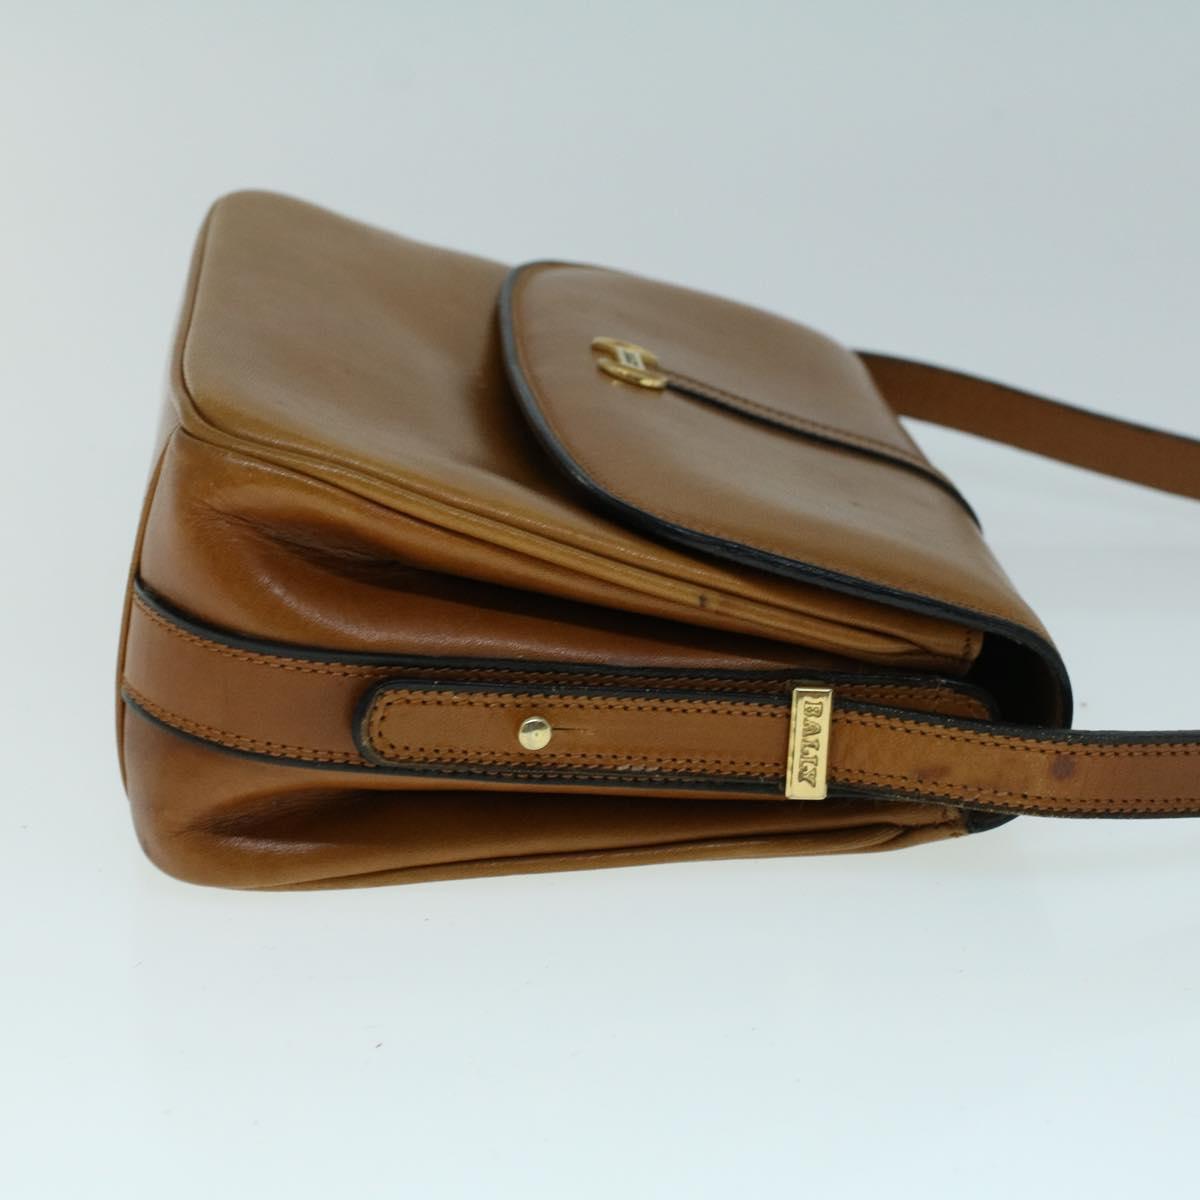 BALLY Shoulder Bag Leather Brown Auth ac2272